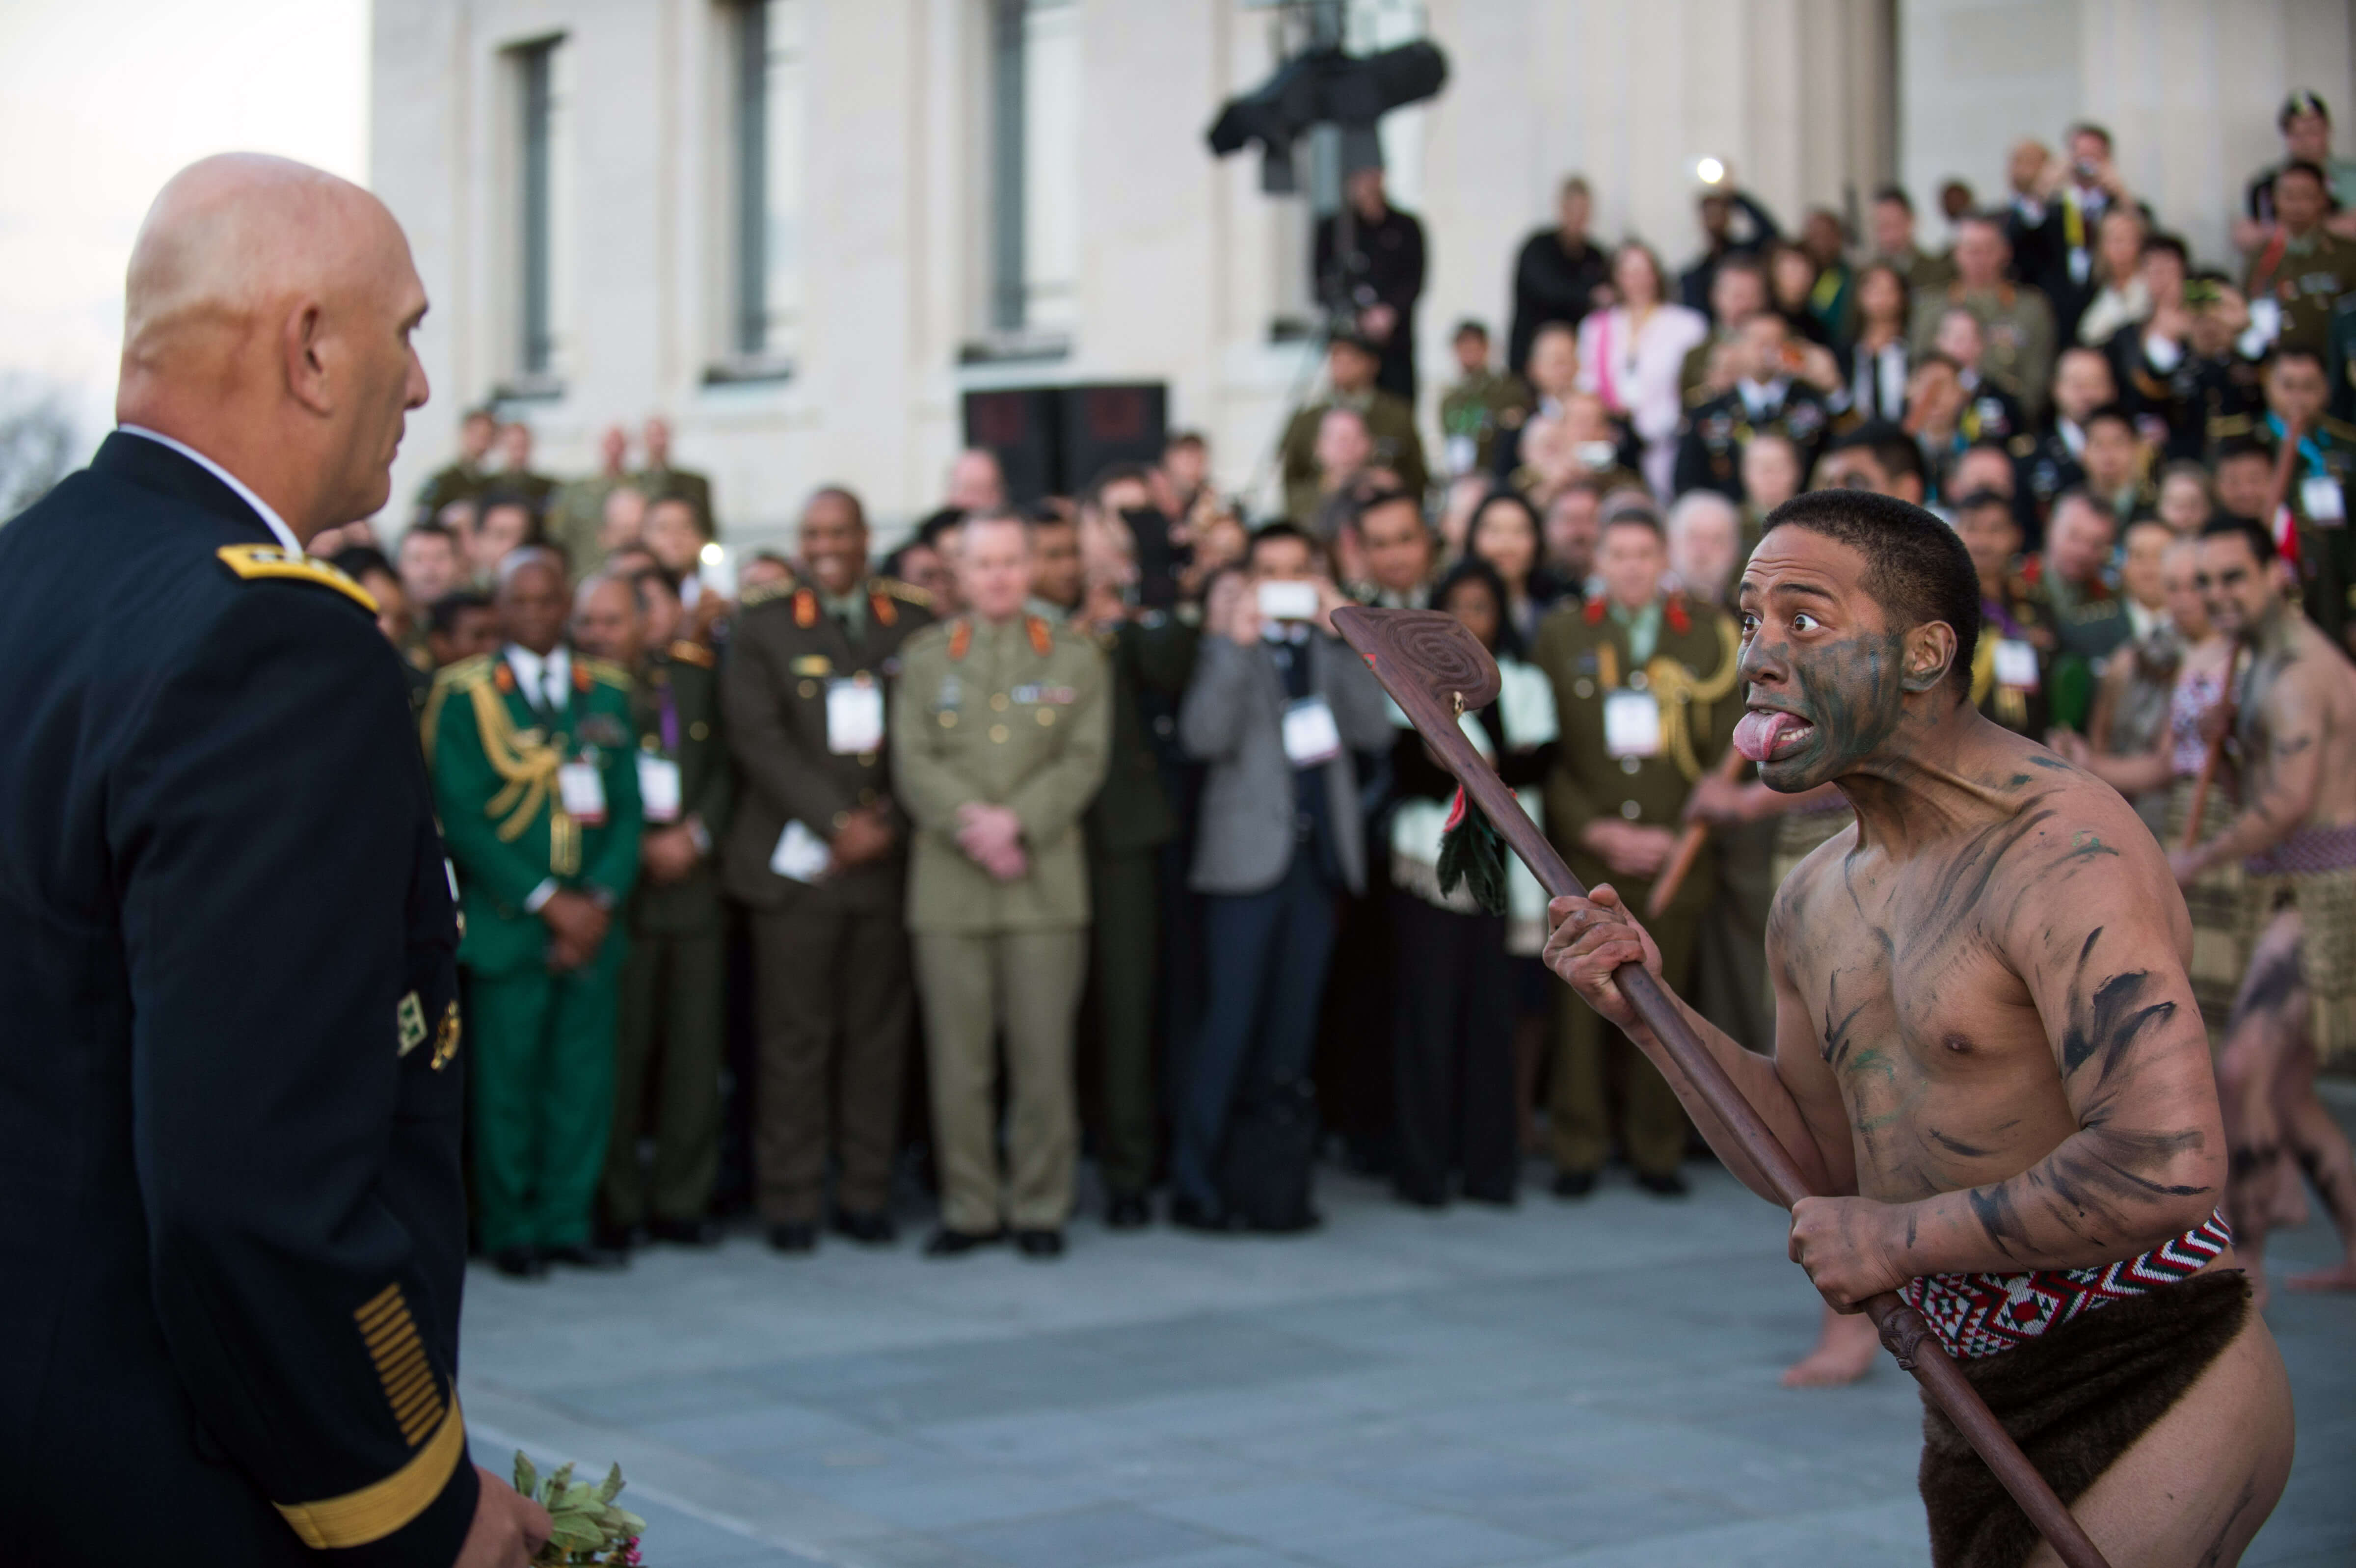 Mauri soldiers, the indigenous Polynesian people of New Zealand, perform a Powhiri ceremony for U.S. Army Chief of Staff Gen. Ray Odierno in Auckland in 2013. Source: U.S. Army